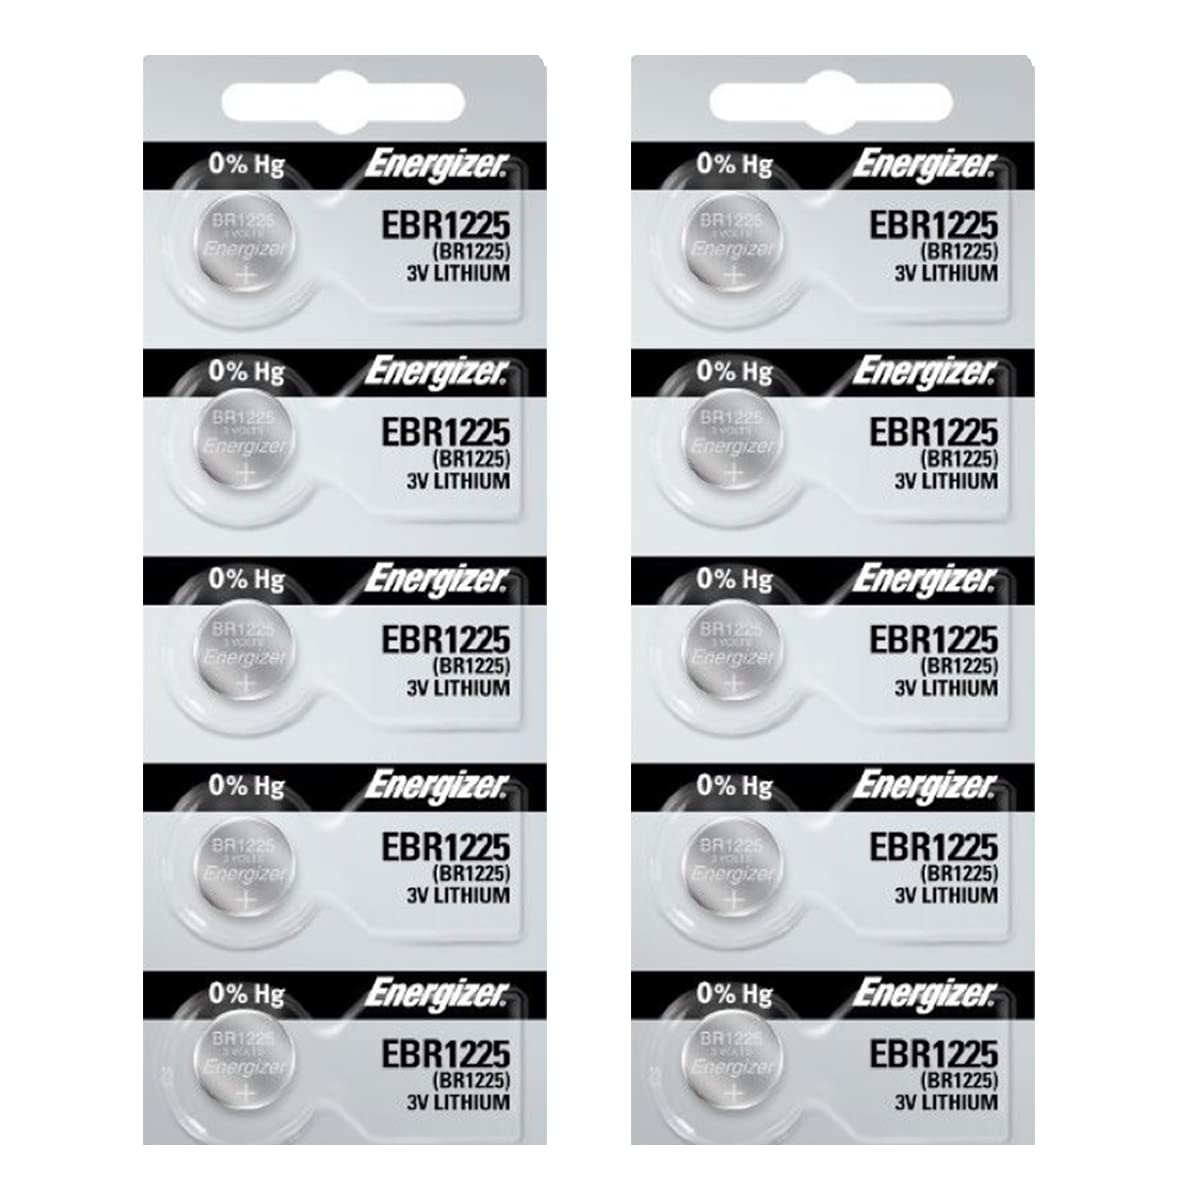 2 X Energizer EBR1225 (BR1225, CR1225) Lithium Coin Cell, On Tear Strip (Pack of 5)